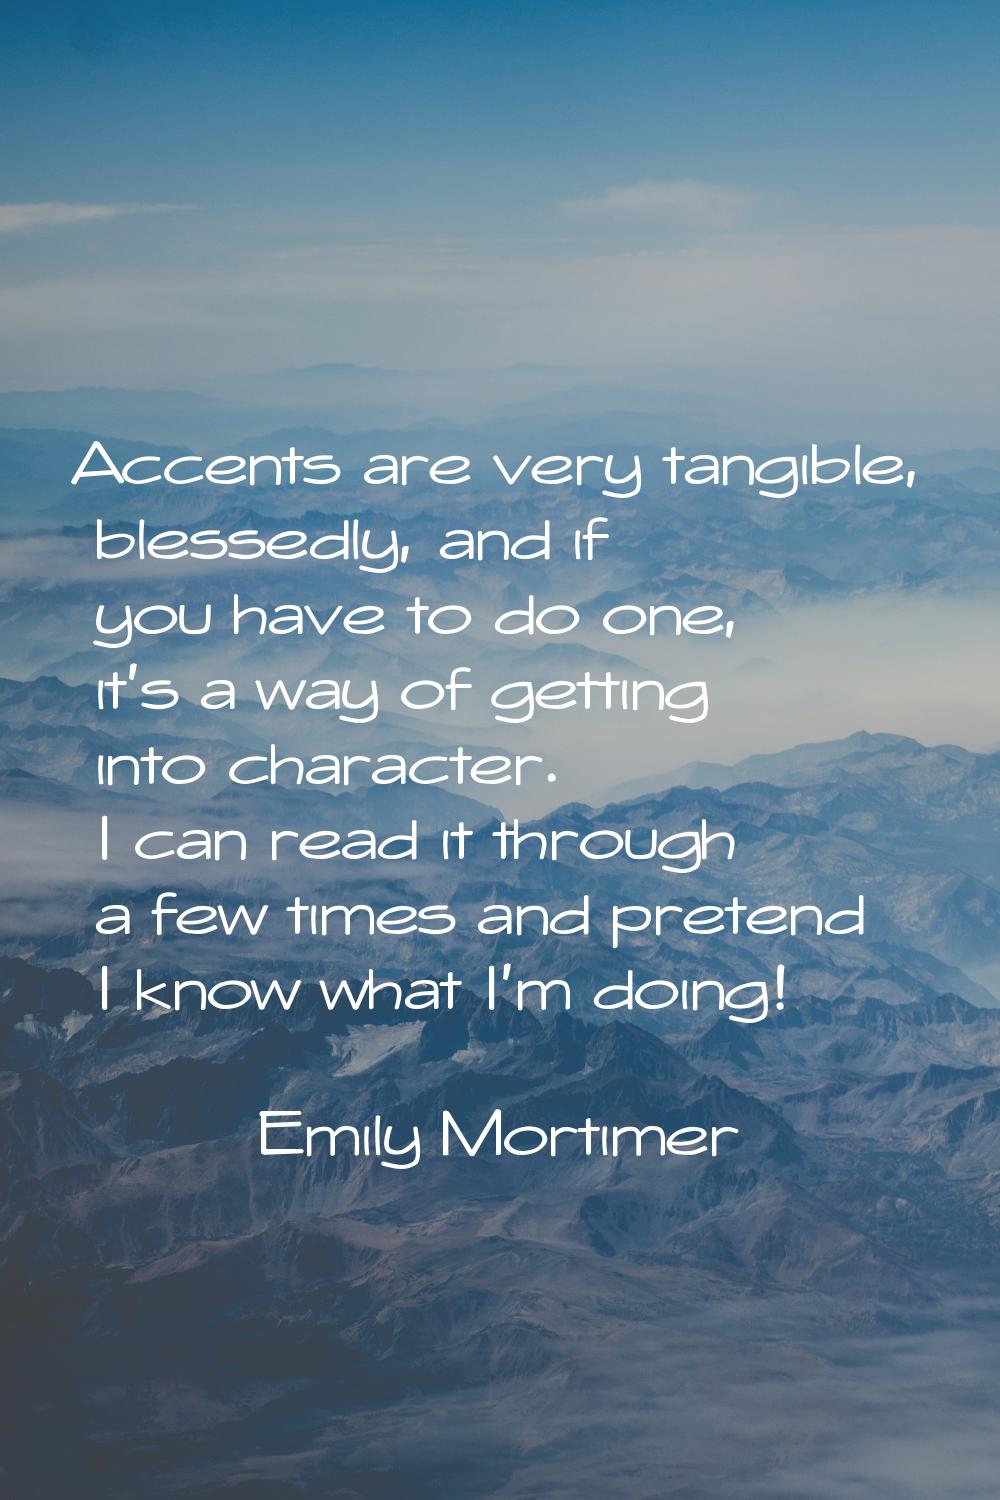 Accents are very tangible, blessedly, and if you have to do one, it's a way of getting into charact